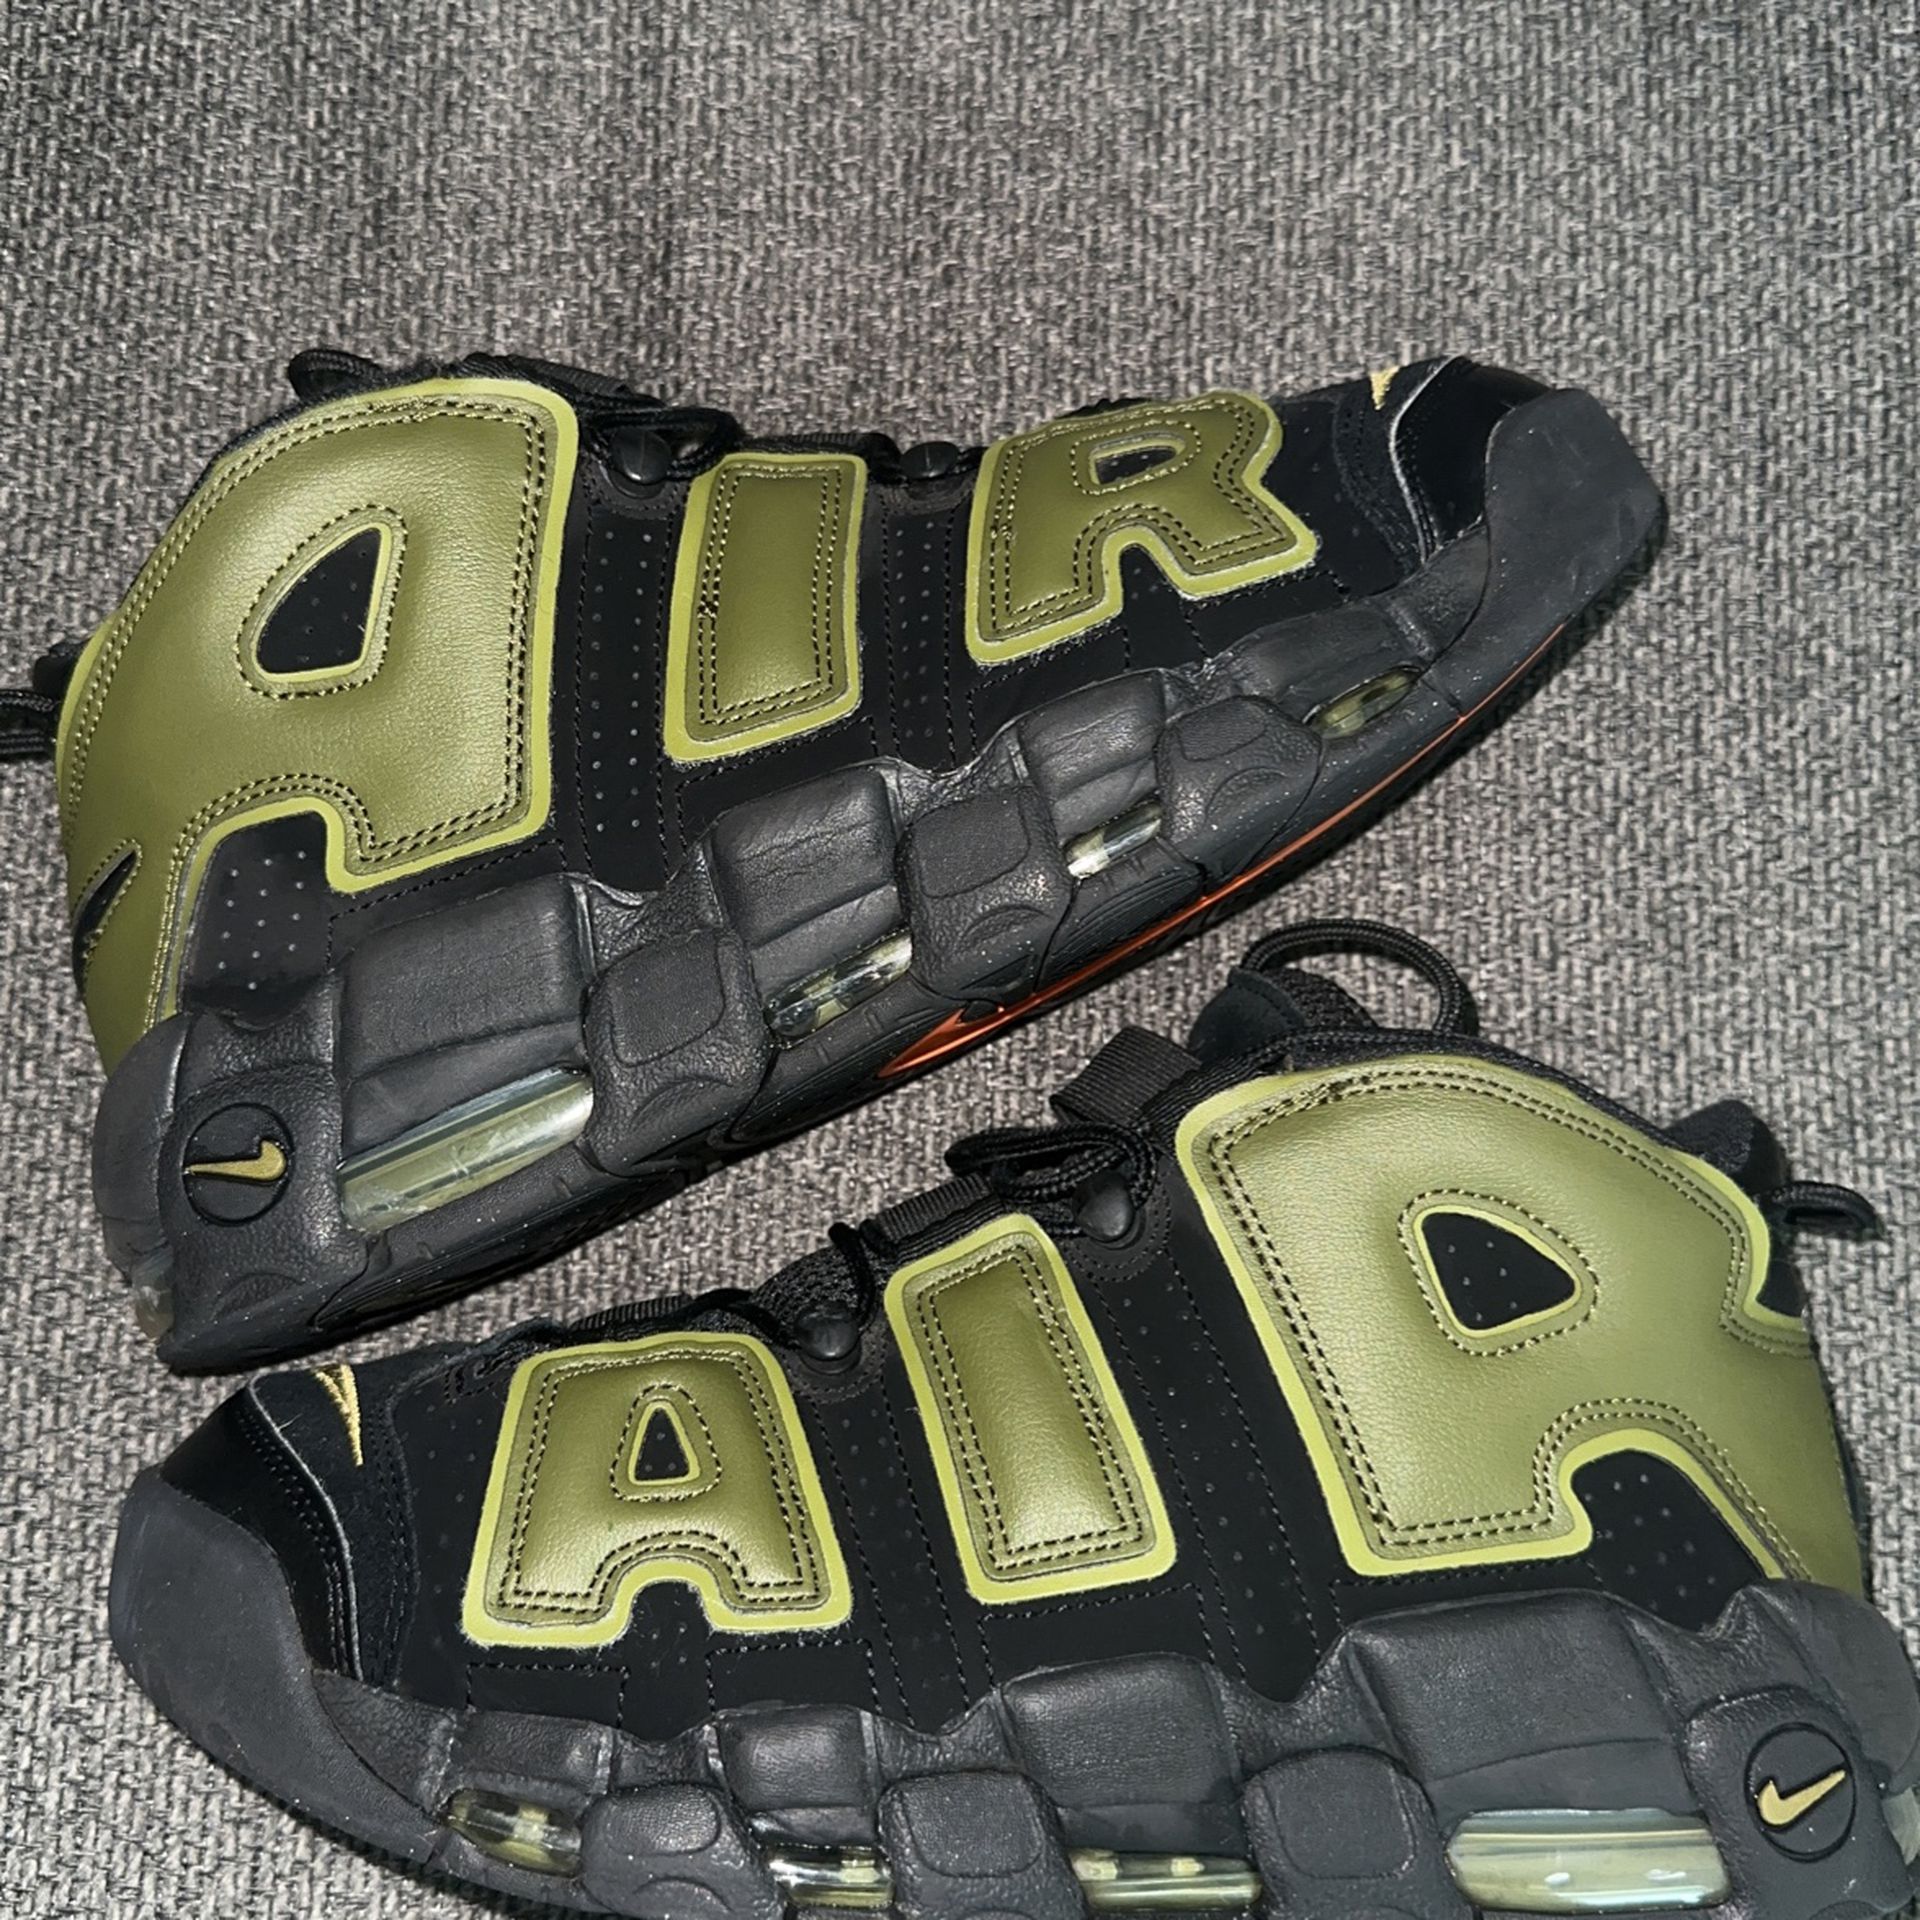 Custom Nike Air More Uptempo Sz 10.5 for Sale in Orlando, FL - OfferUp